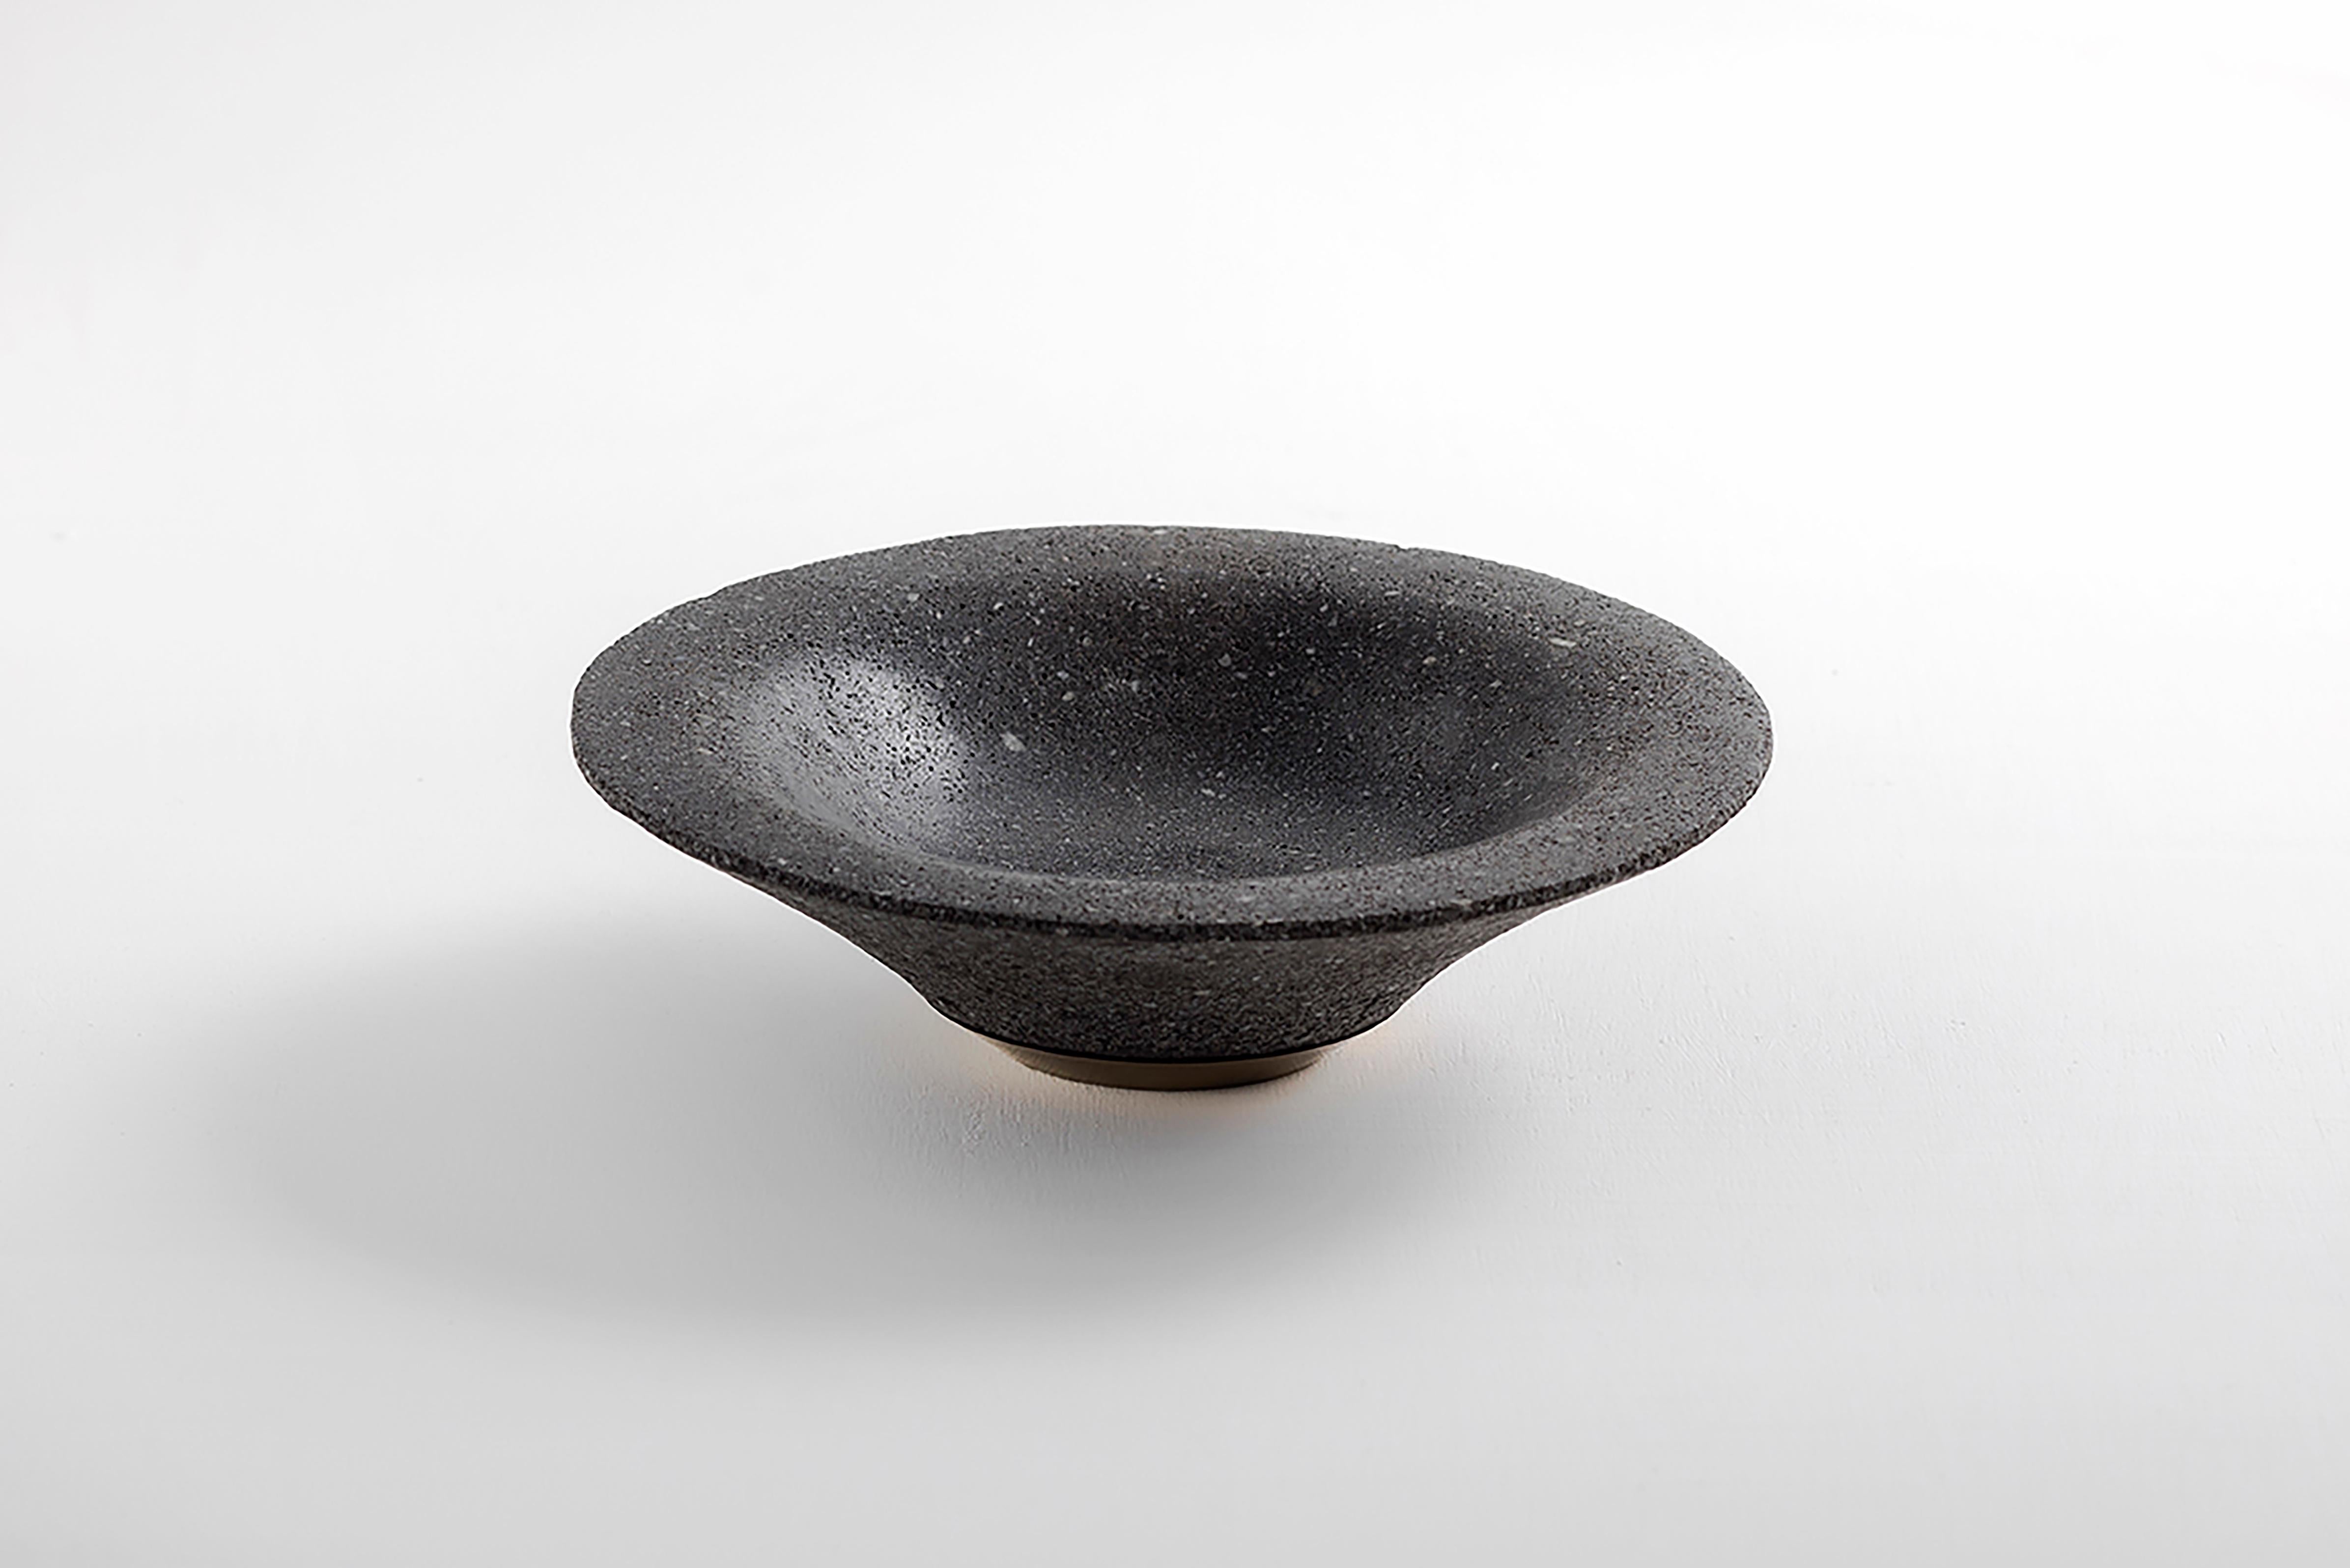 Decorative volcanic stone hand-carved bowl from Chimborazo volcano, with lathed bronze base.

Drawing inspiration from the sacral and baroque motifs of Quito, as well as Ecuador’s highest and dormant volcano, these bowls are meticulously hand-carved